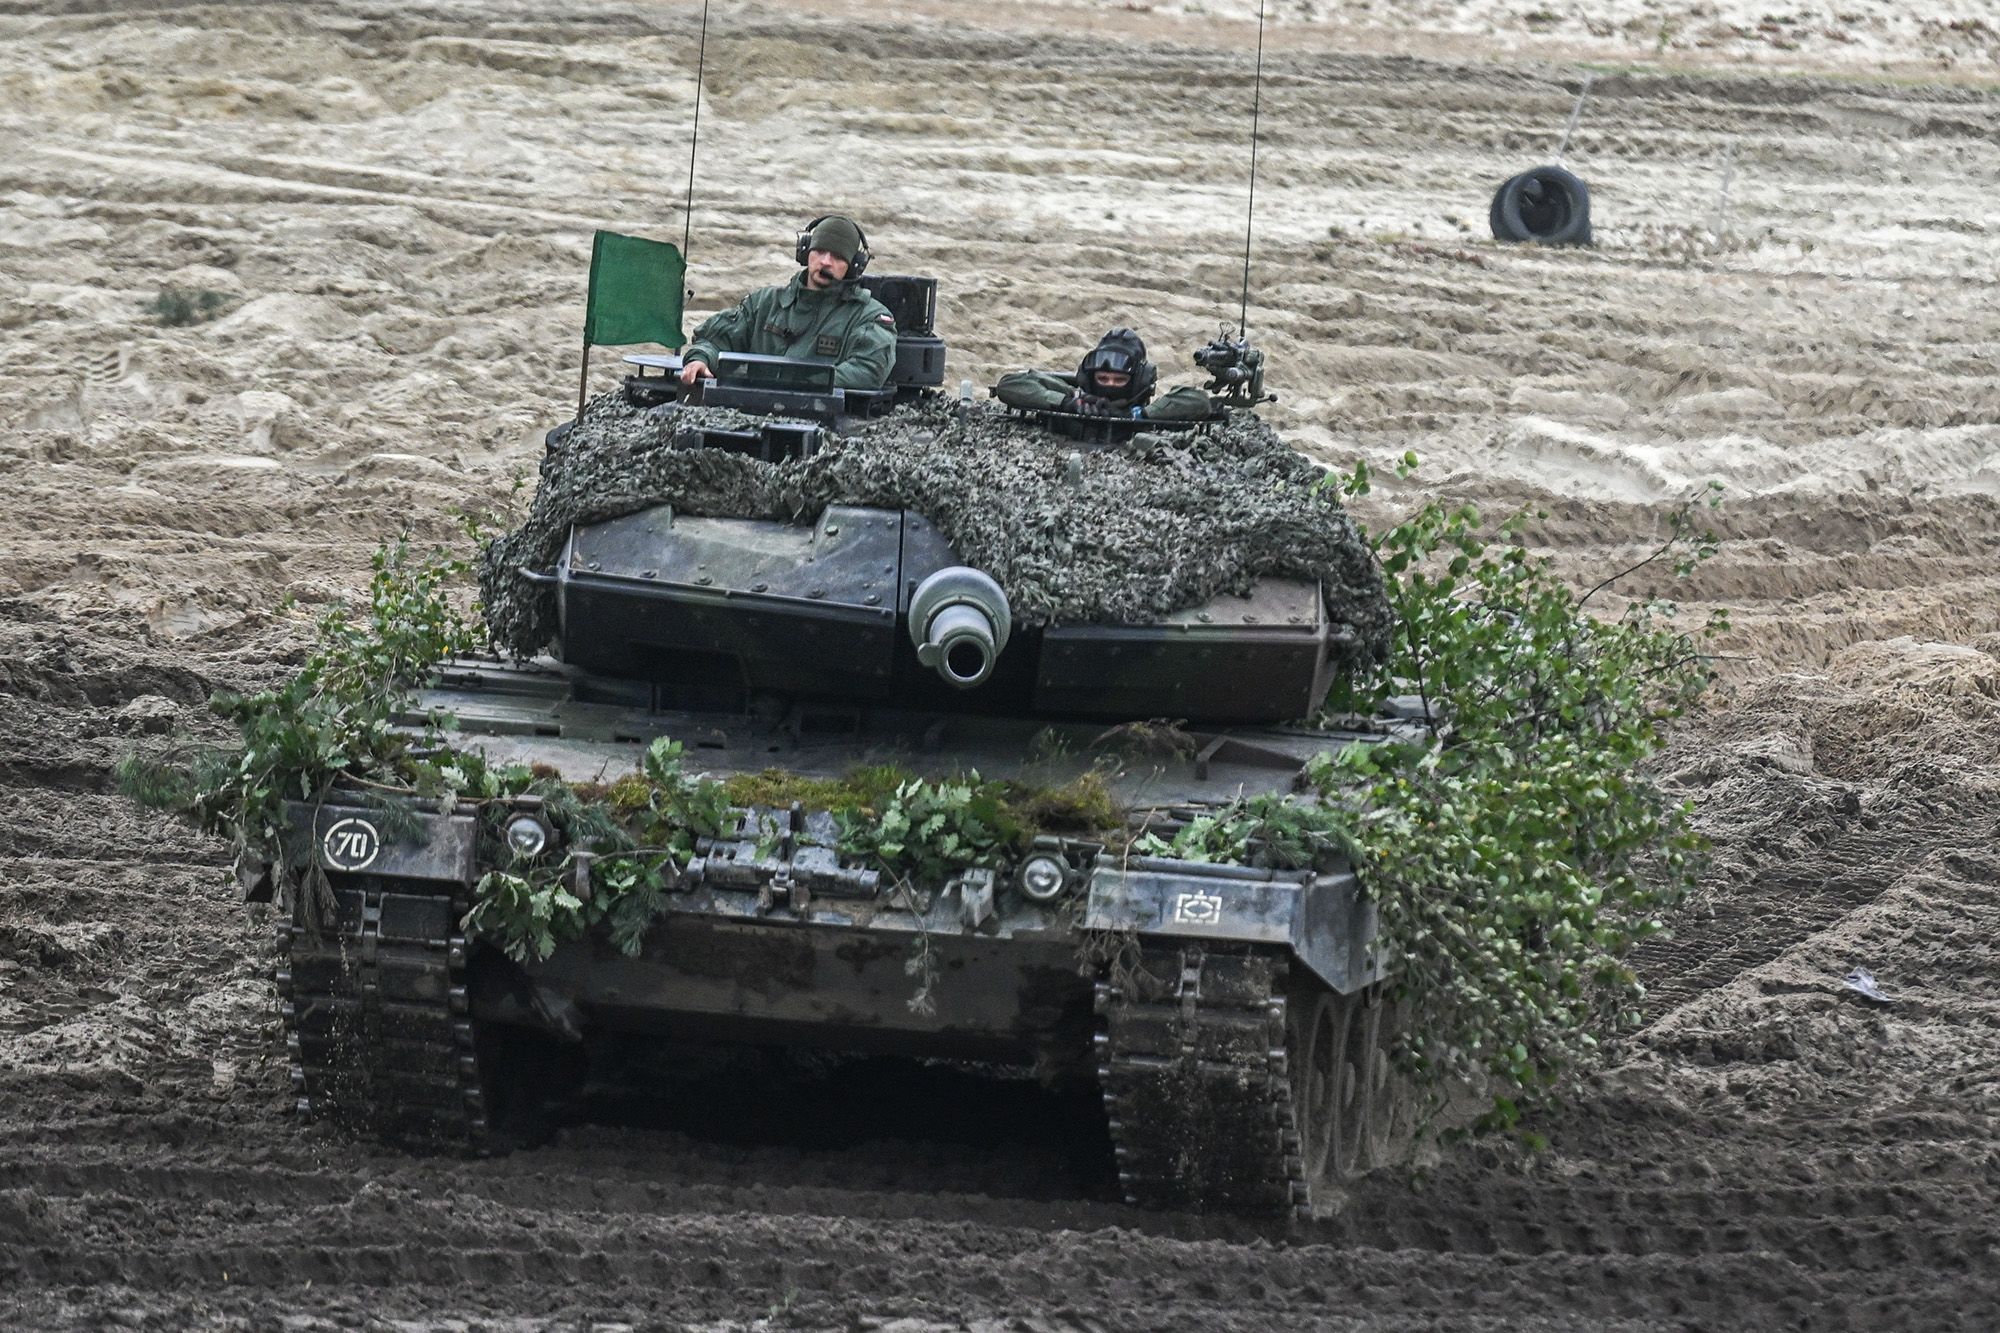 Ukraine’s new tanks won’t be the instant game-changer some expect